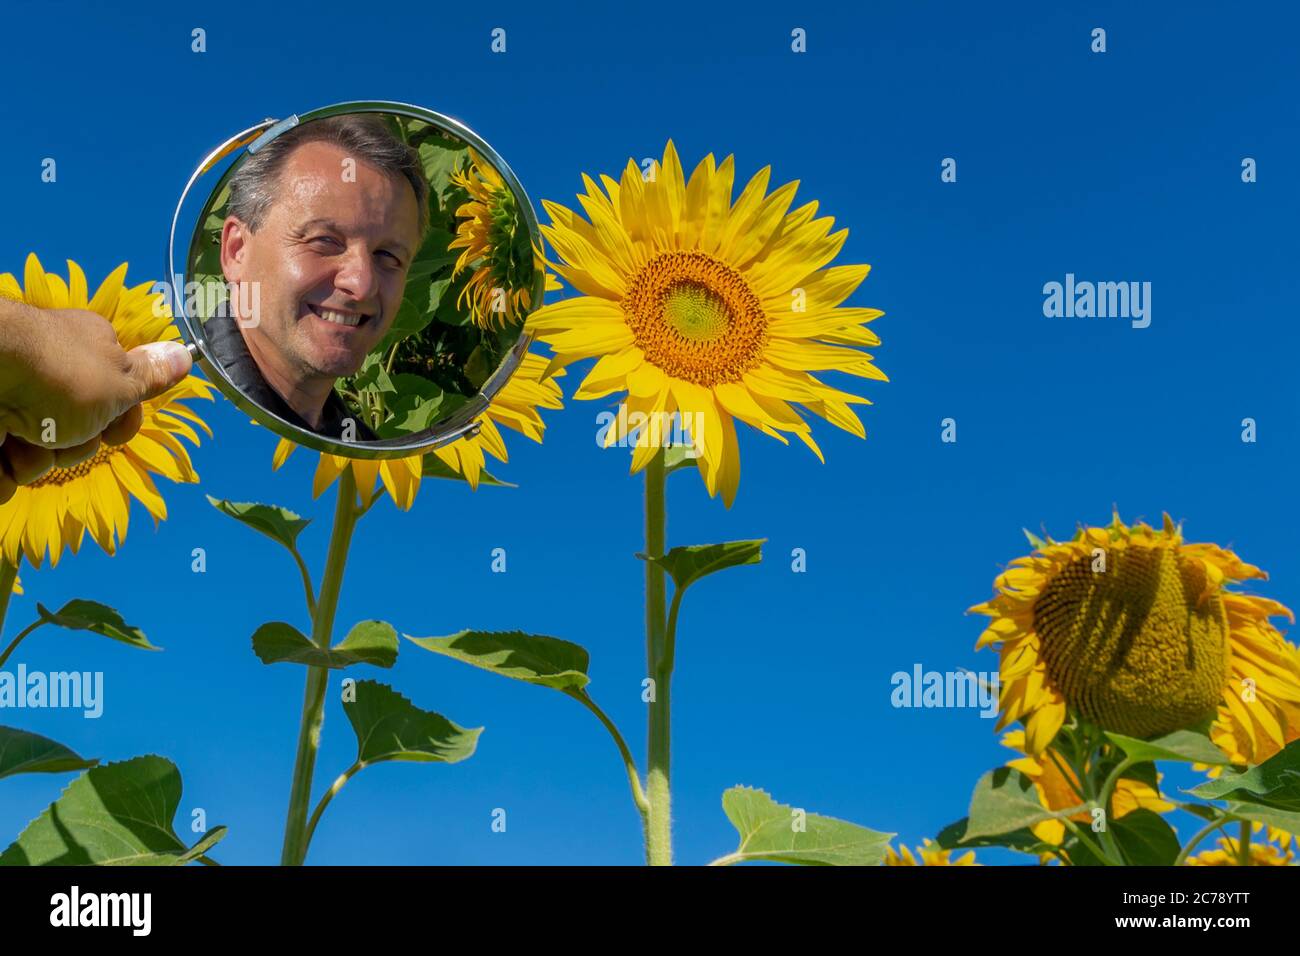 A white man is reflected in a mirror in the middle of a field of sunflowers on a sunny day Stock Photo